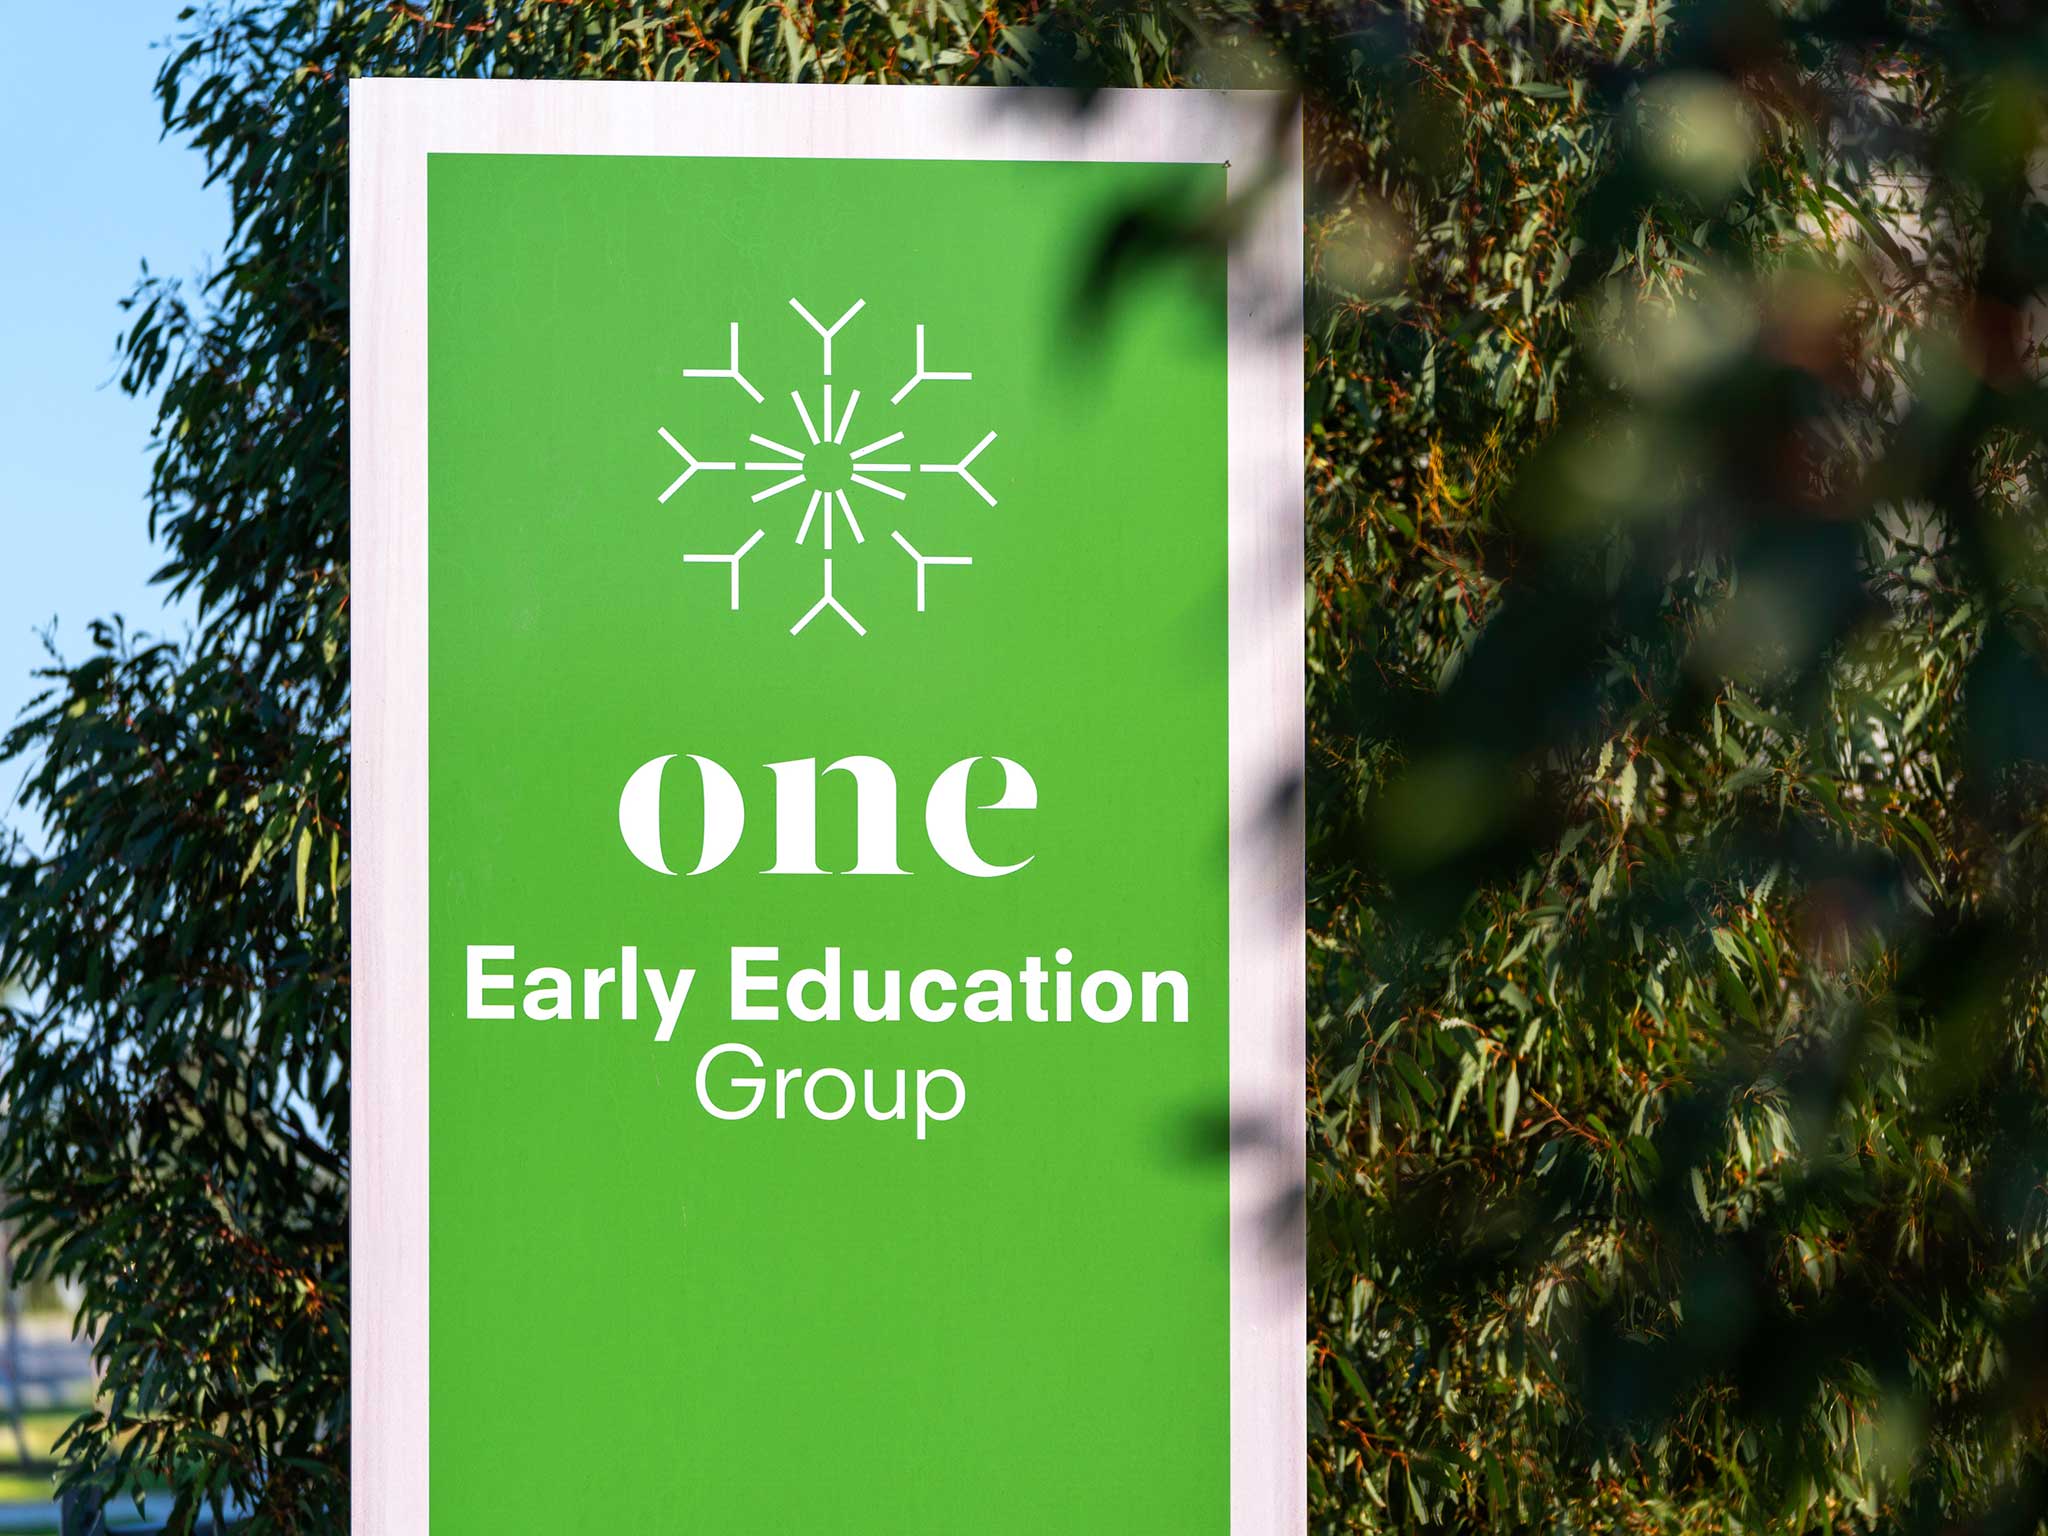 One Early Education Group